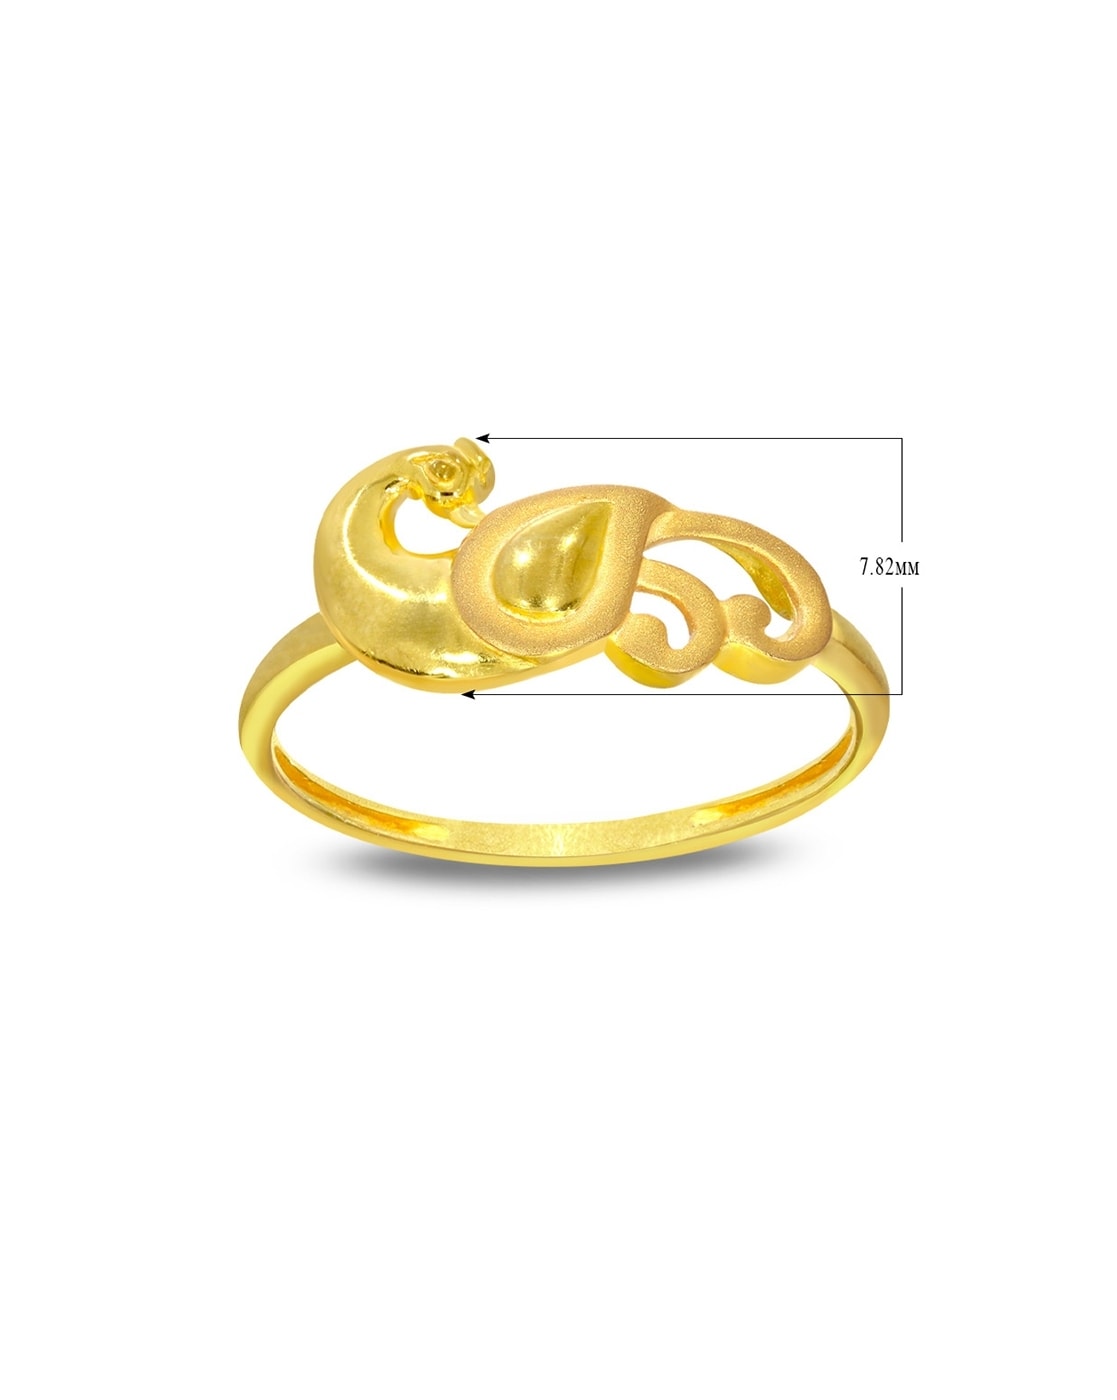 Buy Gold Ring Designs for Female Online| Kalyan Jewellers